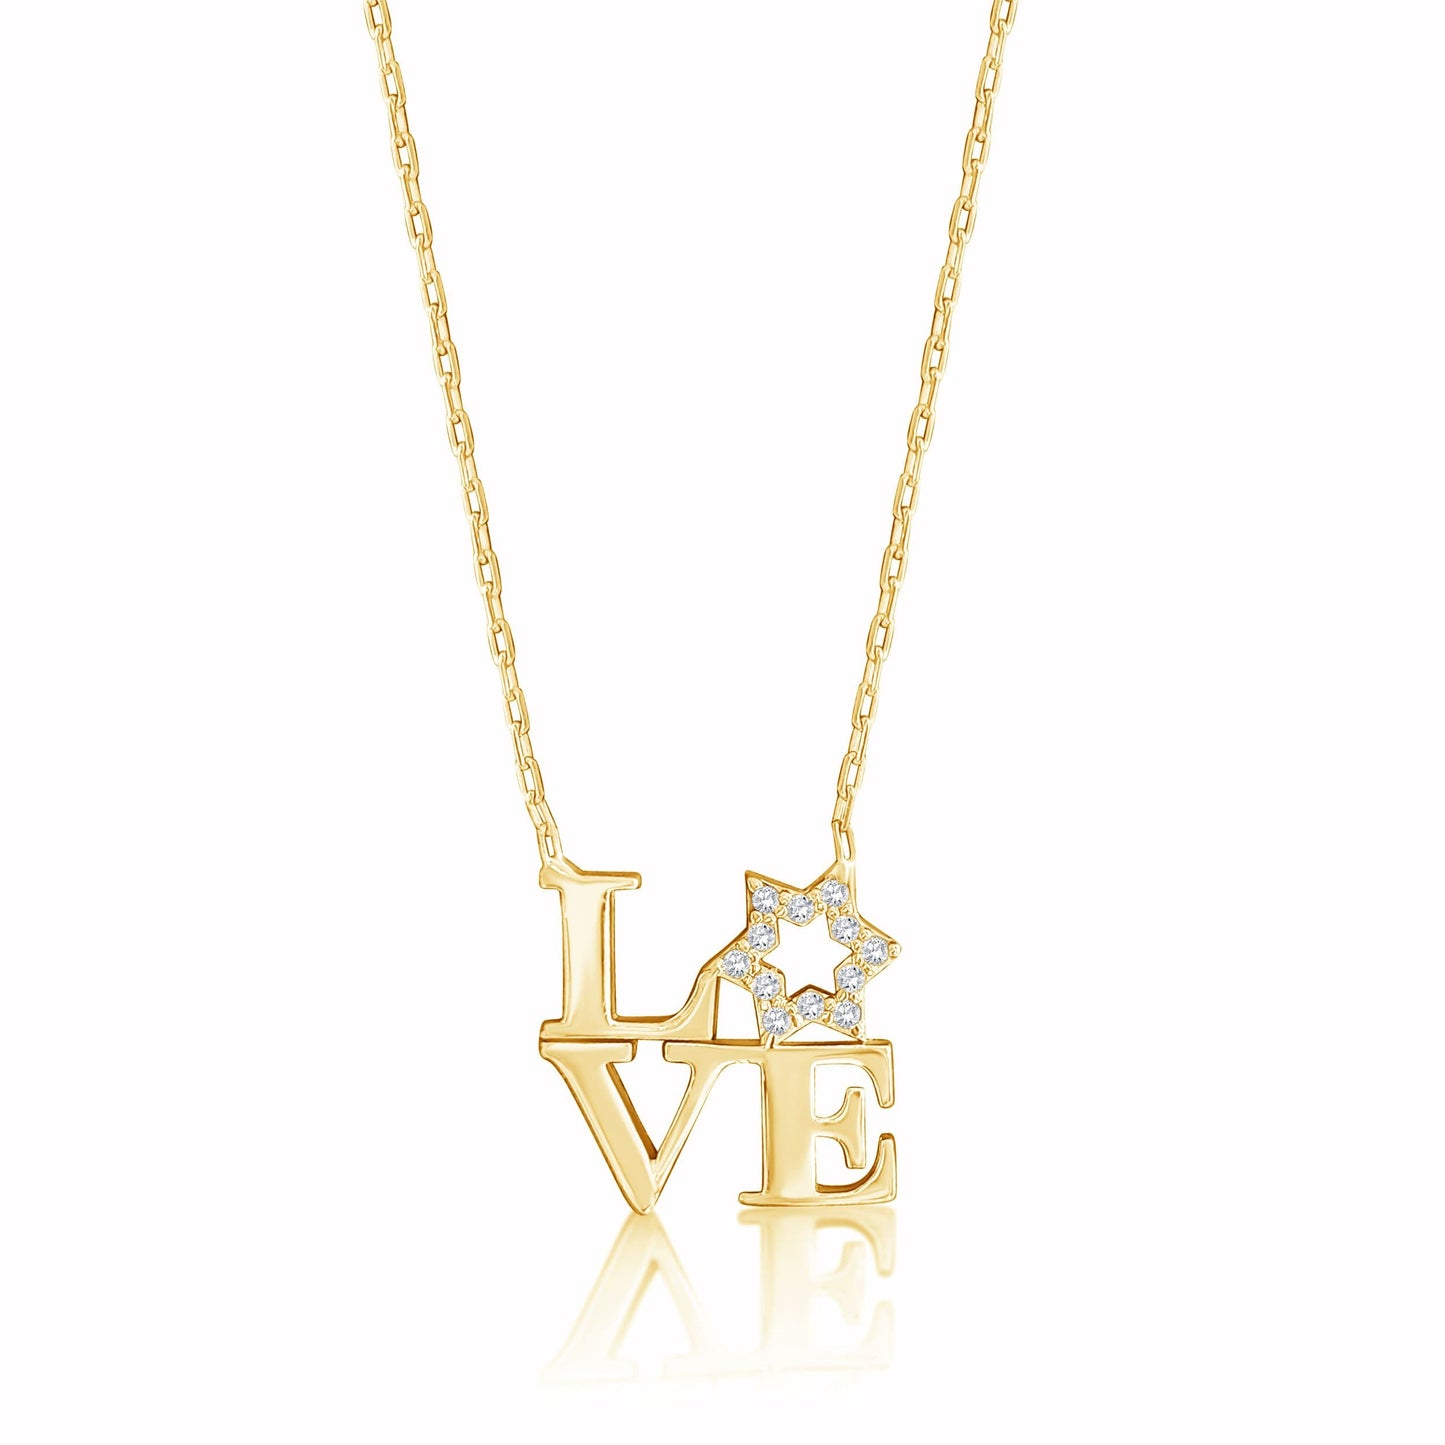 NKL-GPL Love Letter Necklace - Gold Plated